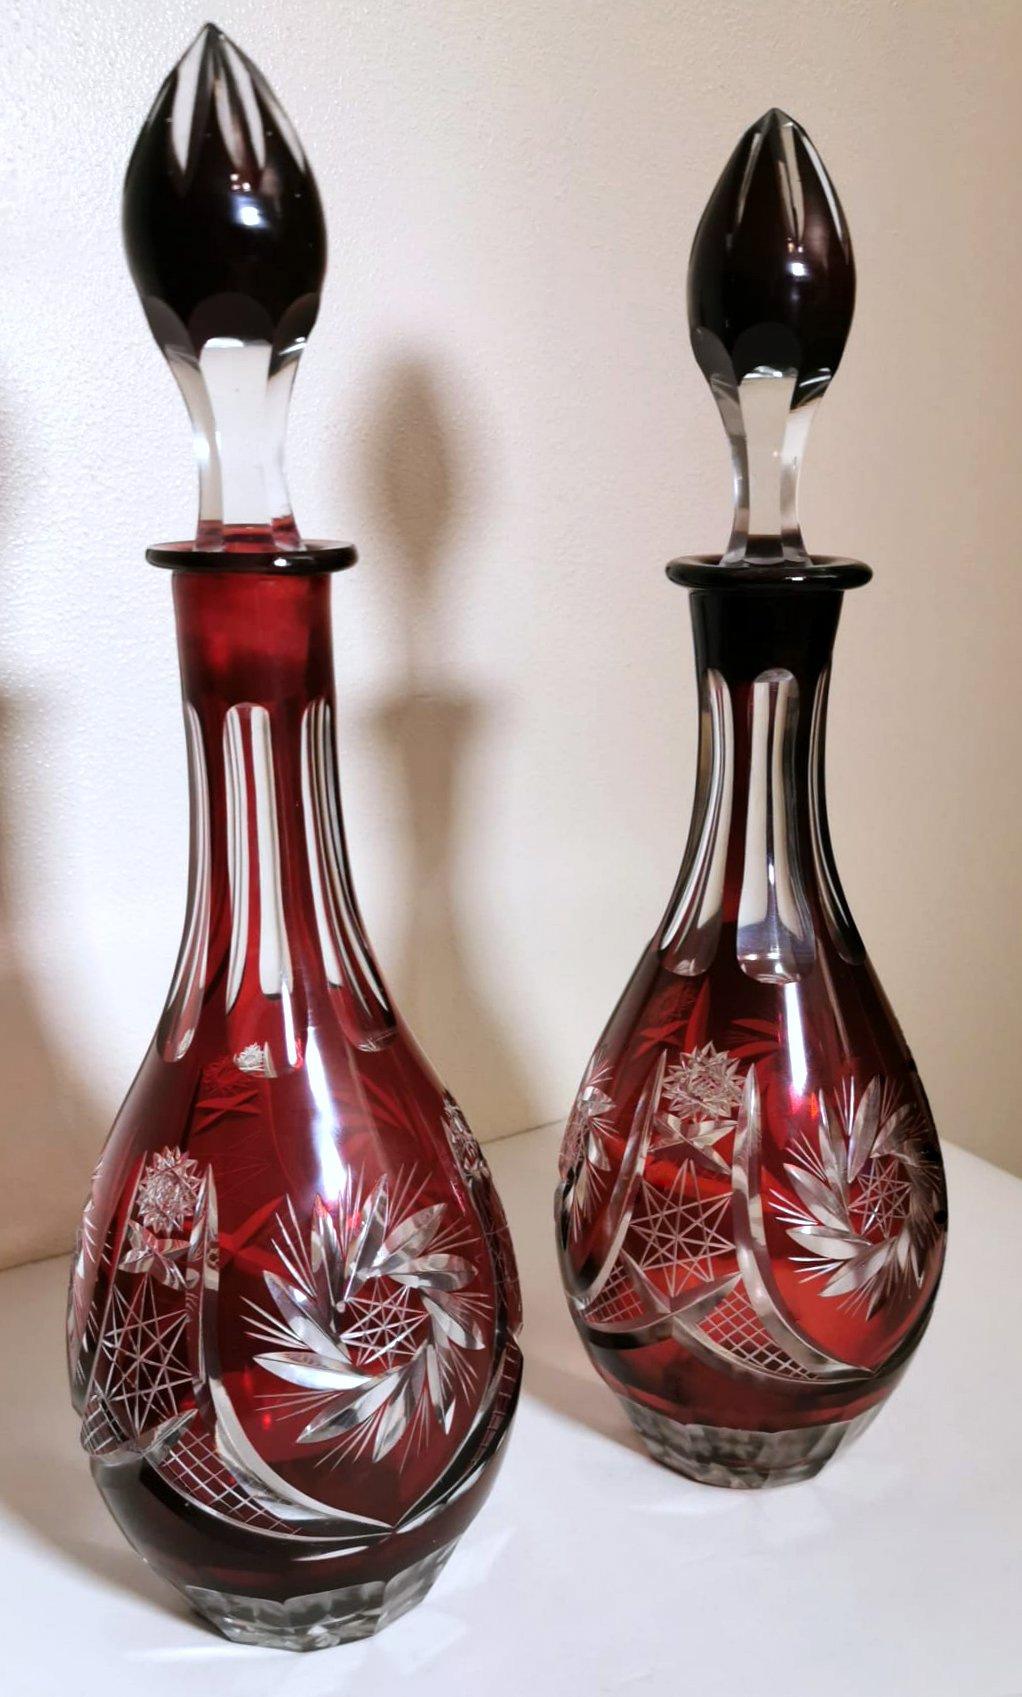 We kindly suggest you read the whole description, because with it we try to give you detailed technical and historical information to guarantee the authenticity of our objects.
Spectacular and striking pair of ruby red crystal bottles; made between